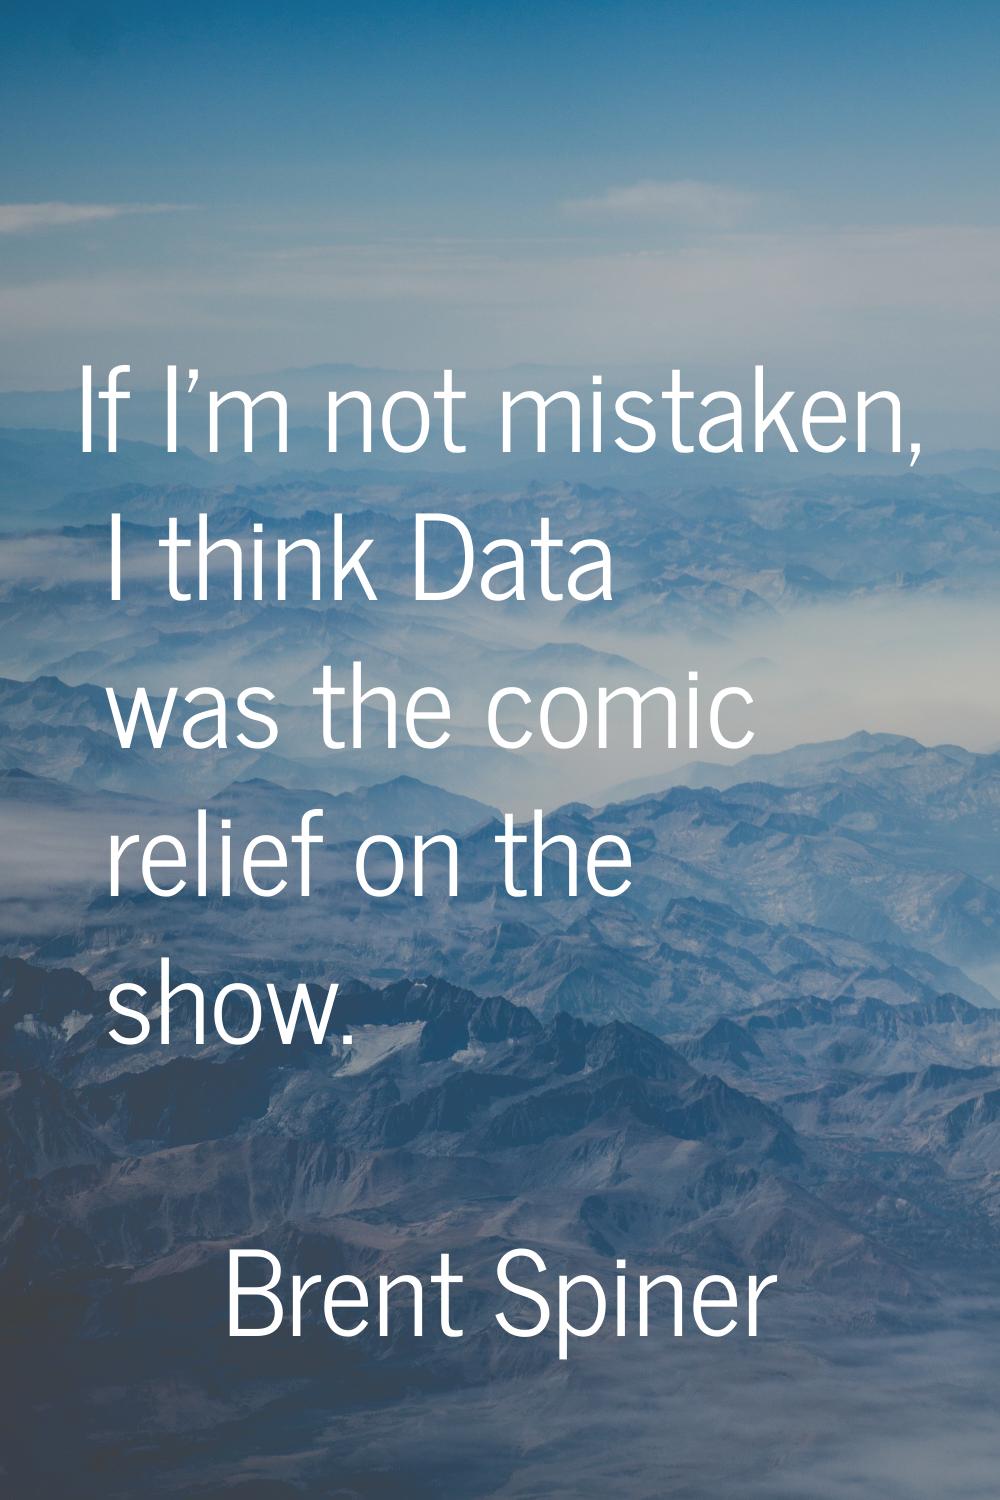 If I'm not mistaken, I think Data was the comic relief on the show.